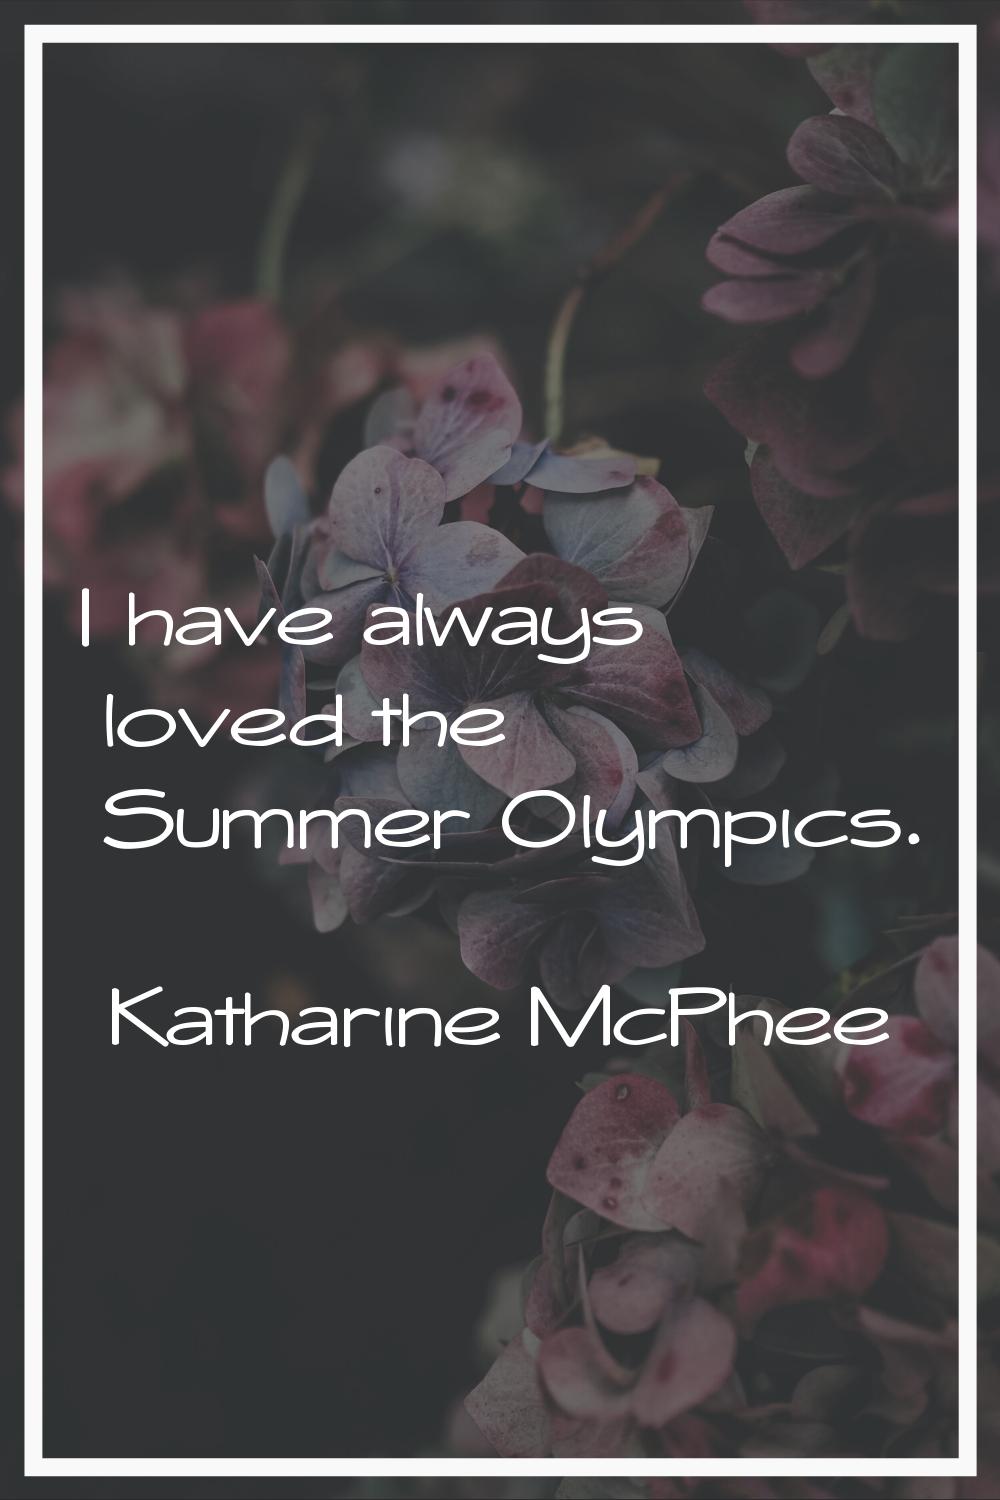 I have always loved the Summer Olympics.